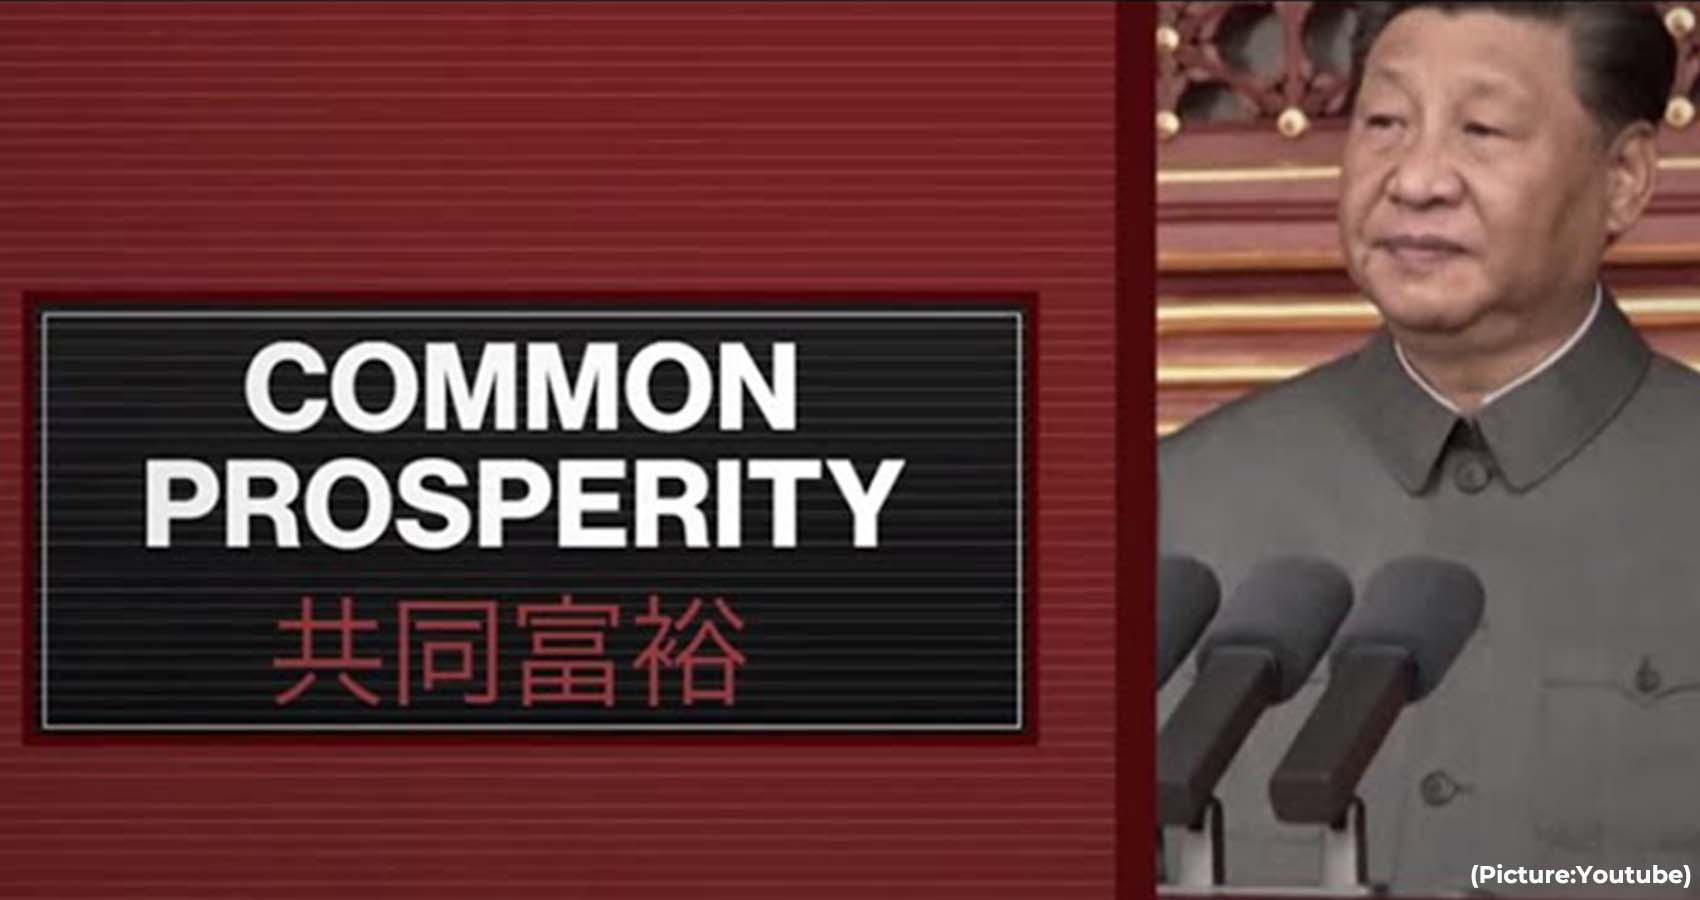 “Common Prosperity” By President XI A Defining Theme Of Chinese Politics